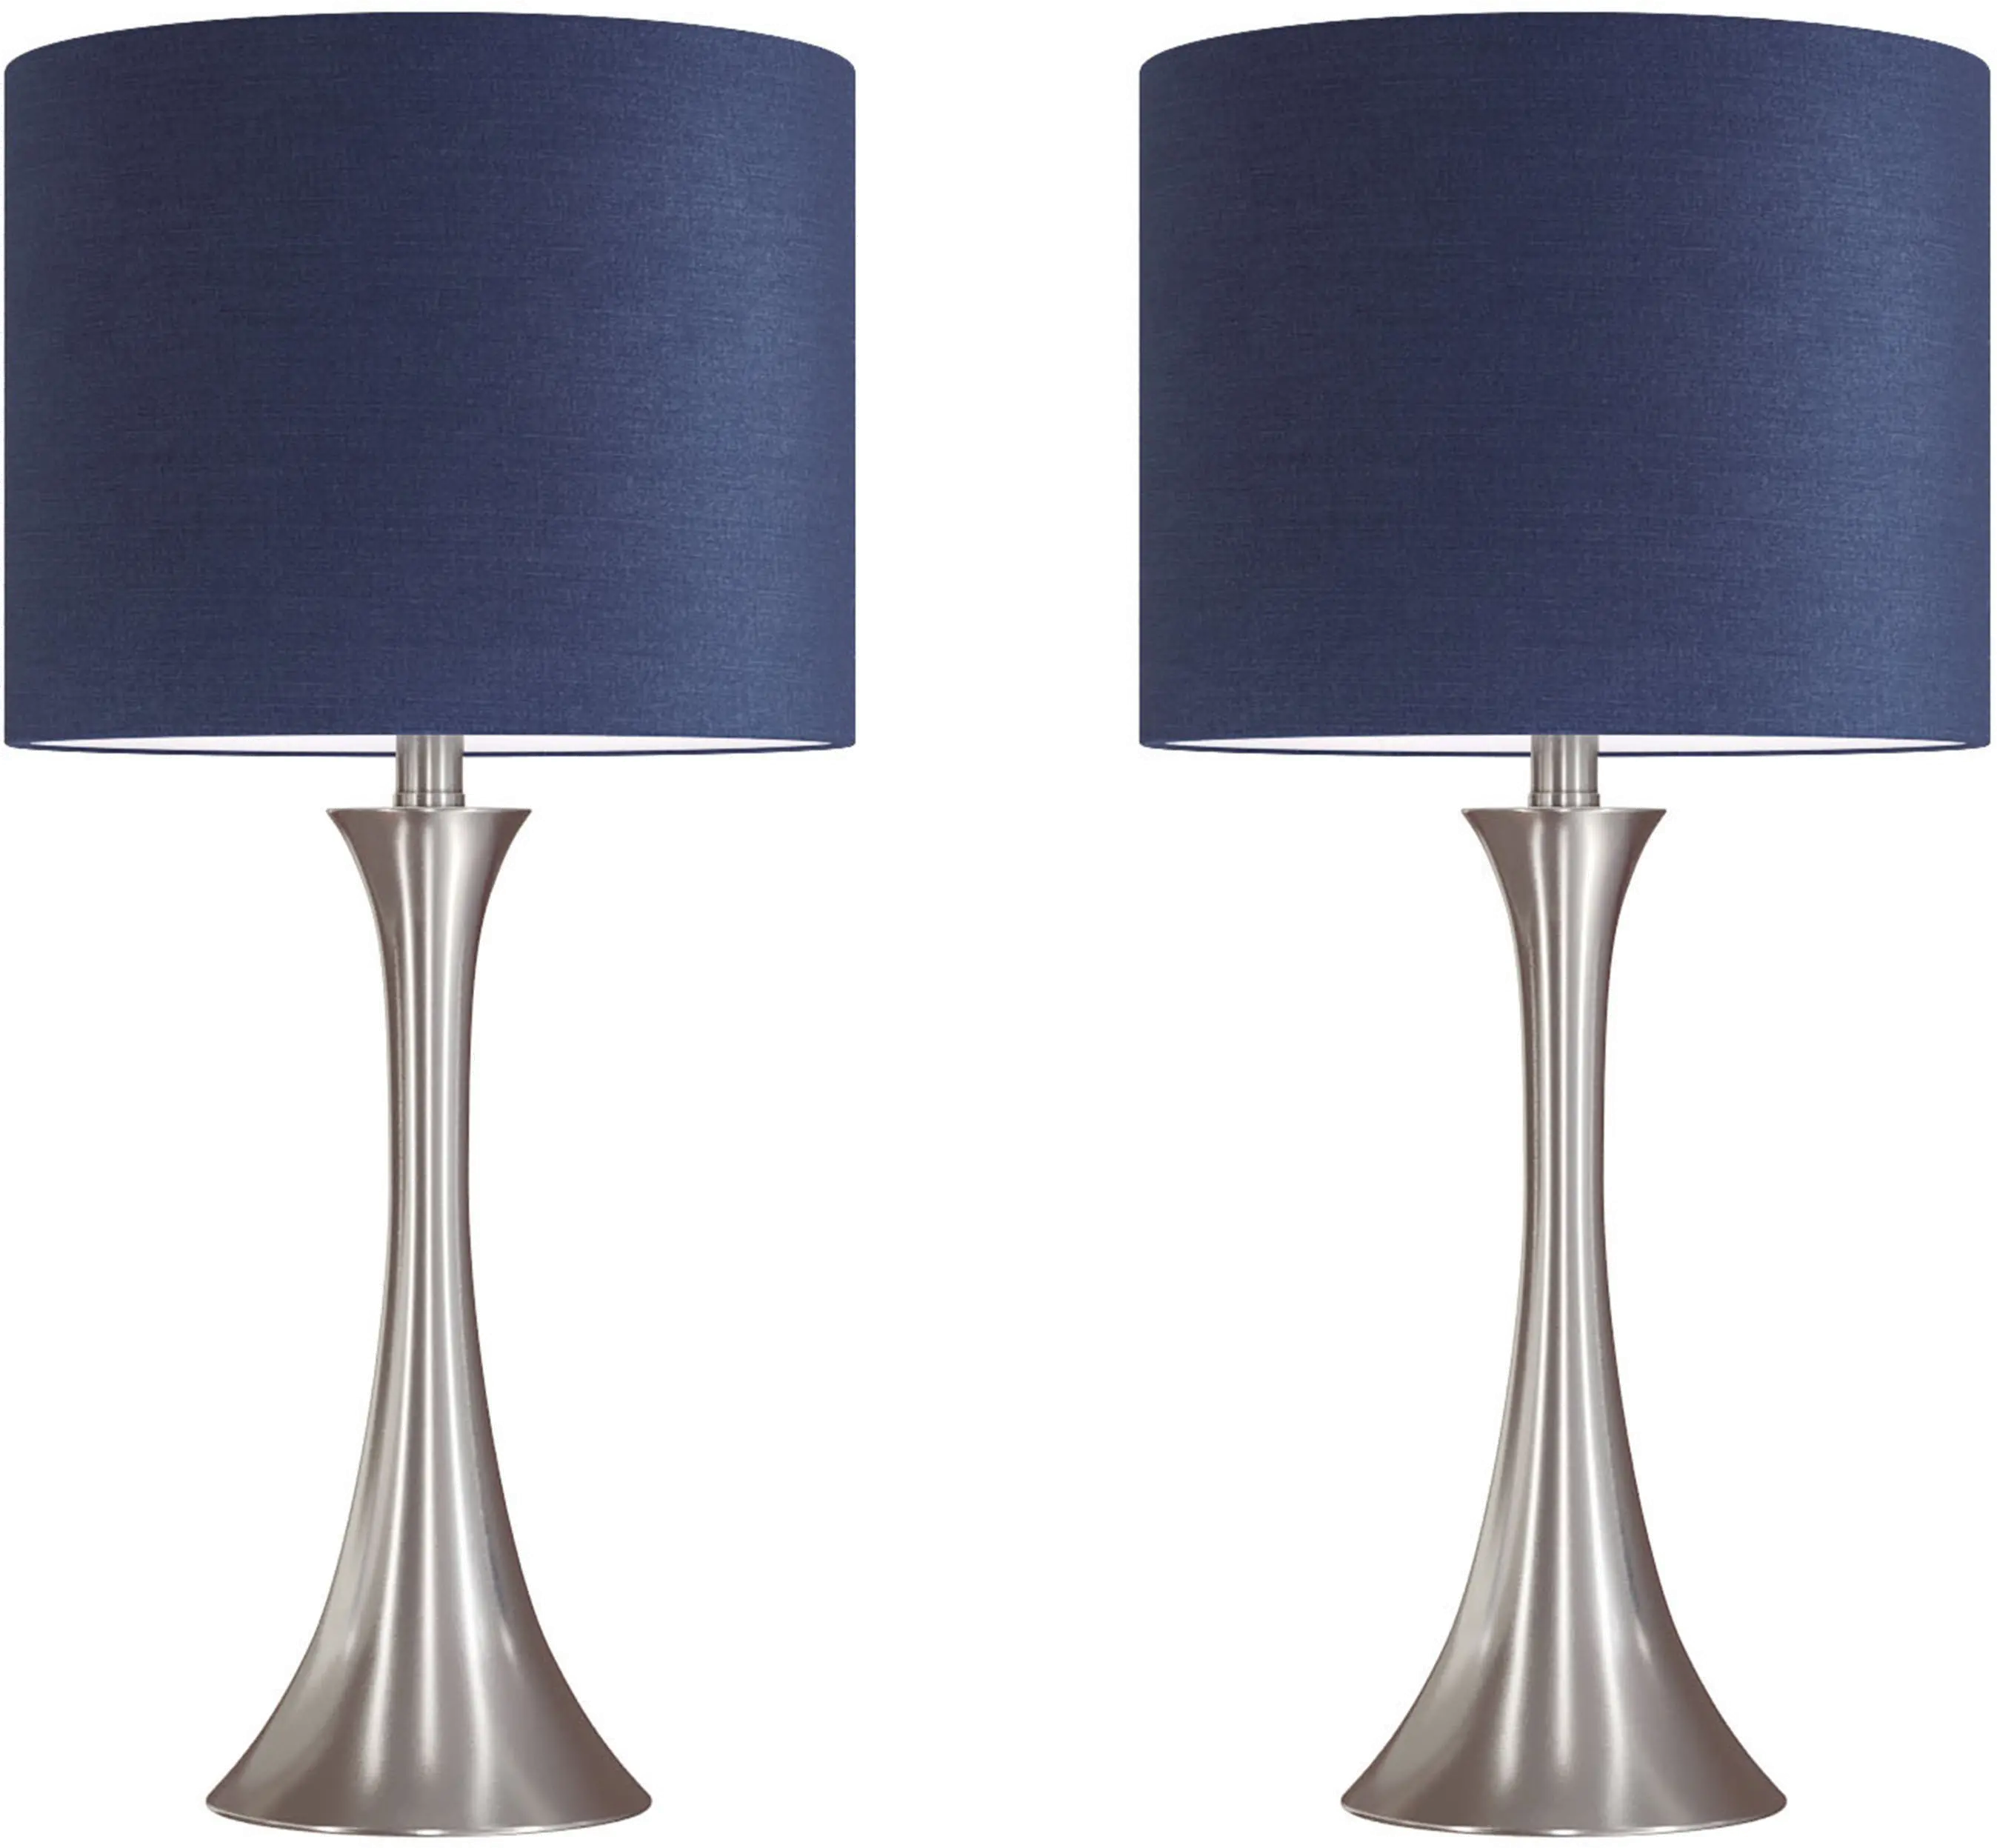 TL24-LENUXE-DBLNINVY2 Lenuxe Nickel Table Lamps with Navy Blue Shades, S sku TL24-LENUXE-DBLNINVY2